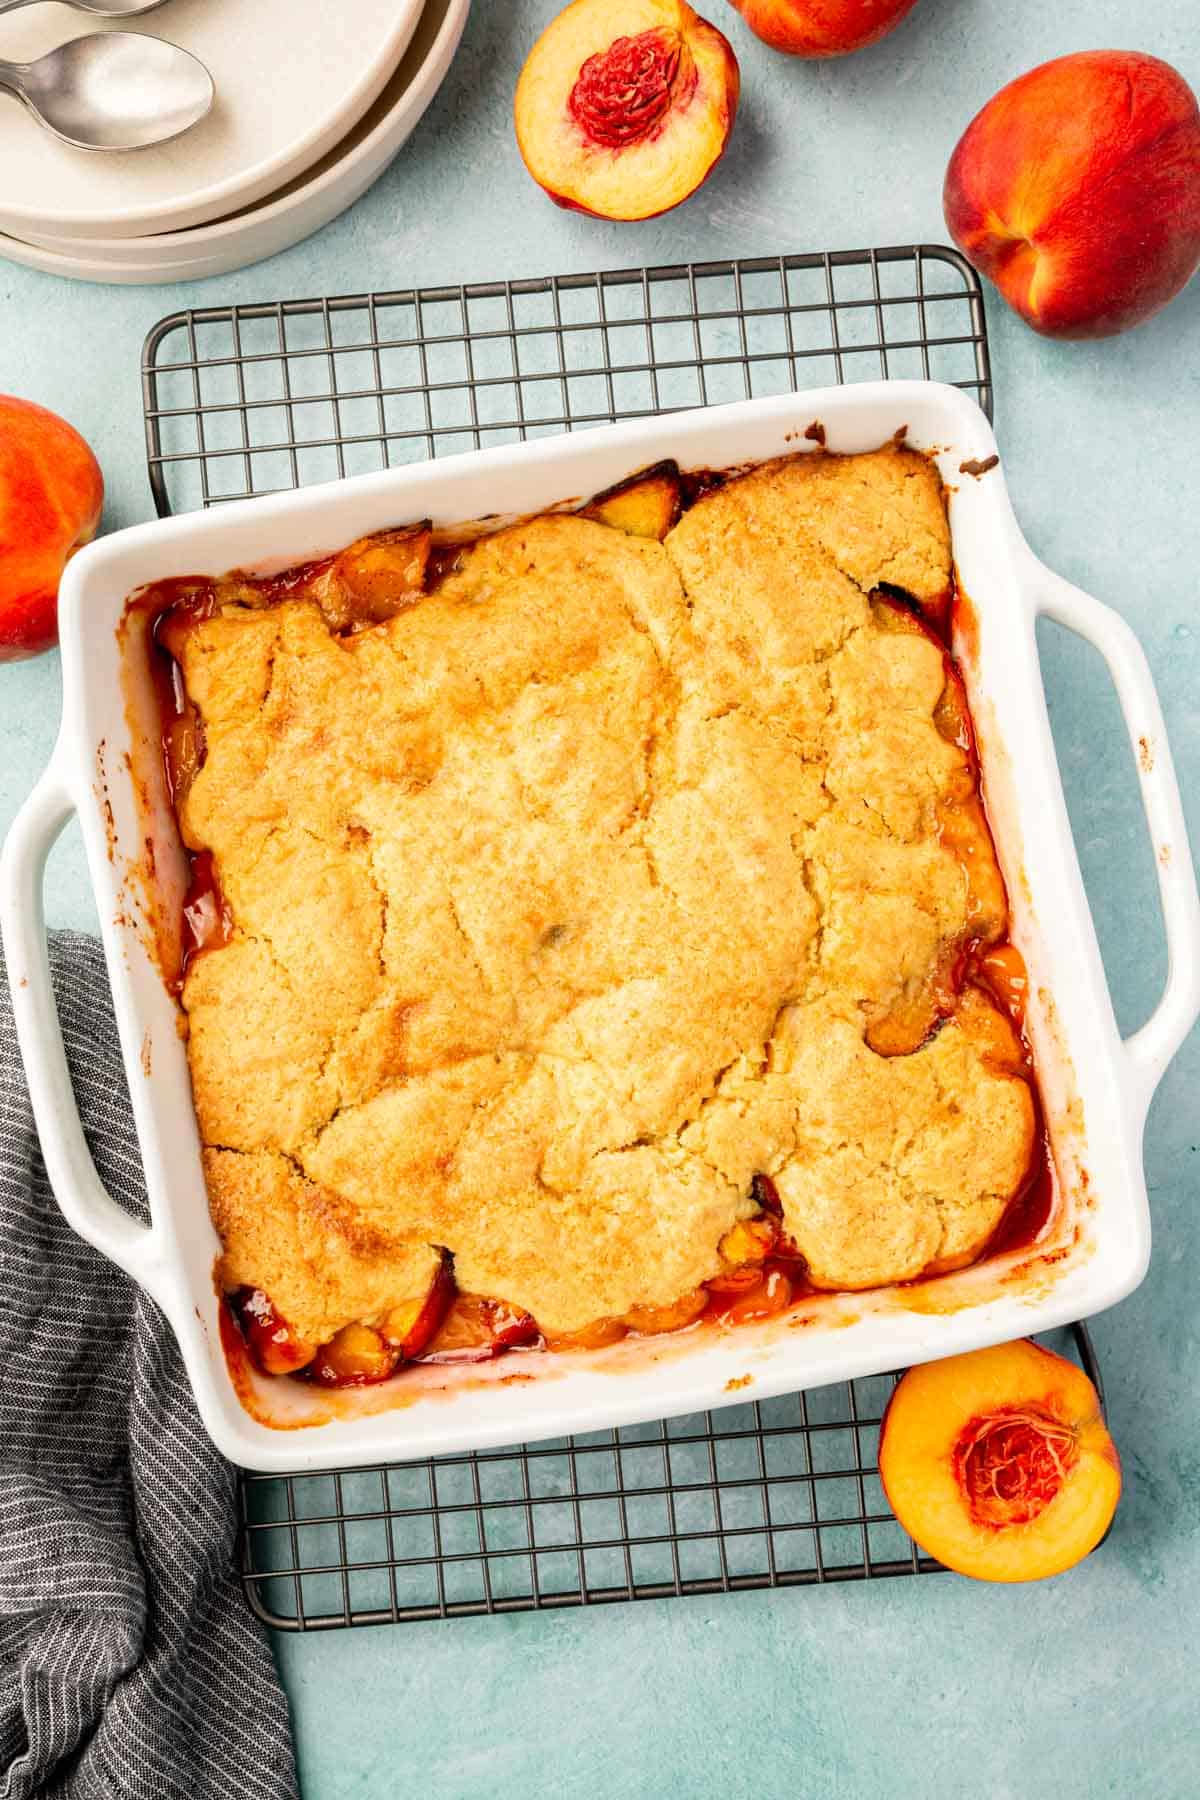 An overhead view of a square baking dish of gf peach cobbler with fresh peach halves around the dish.